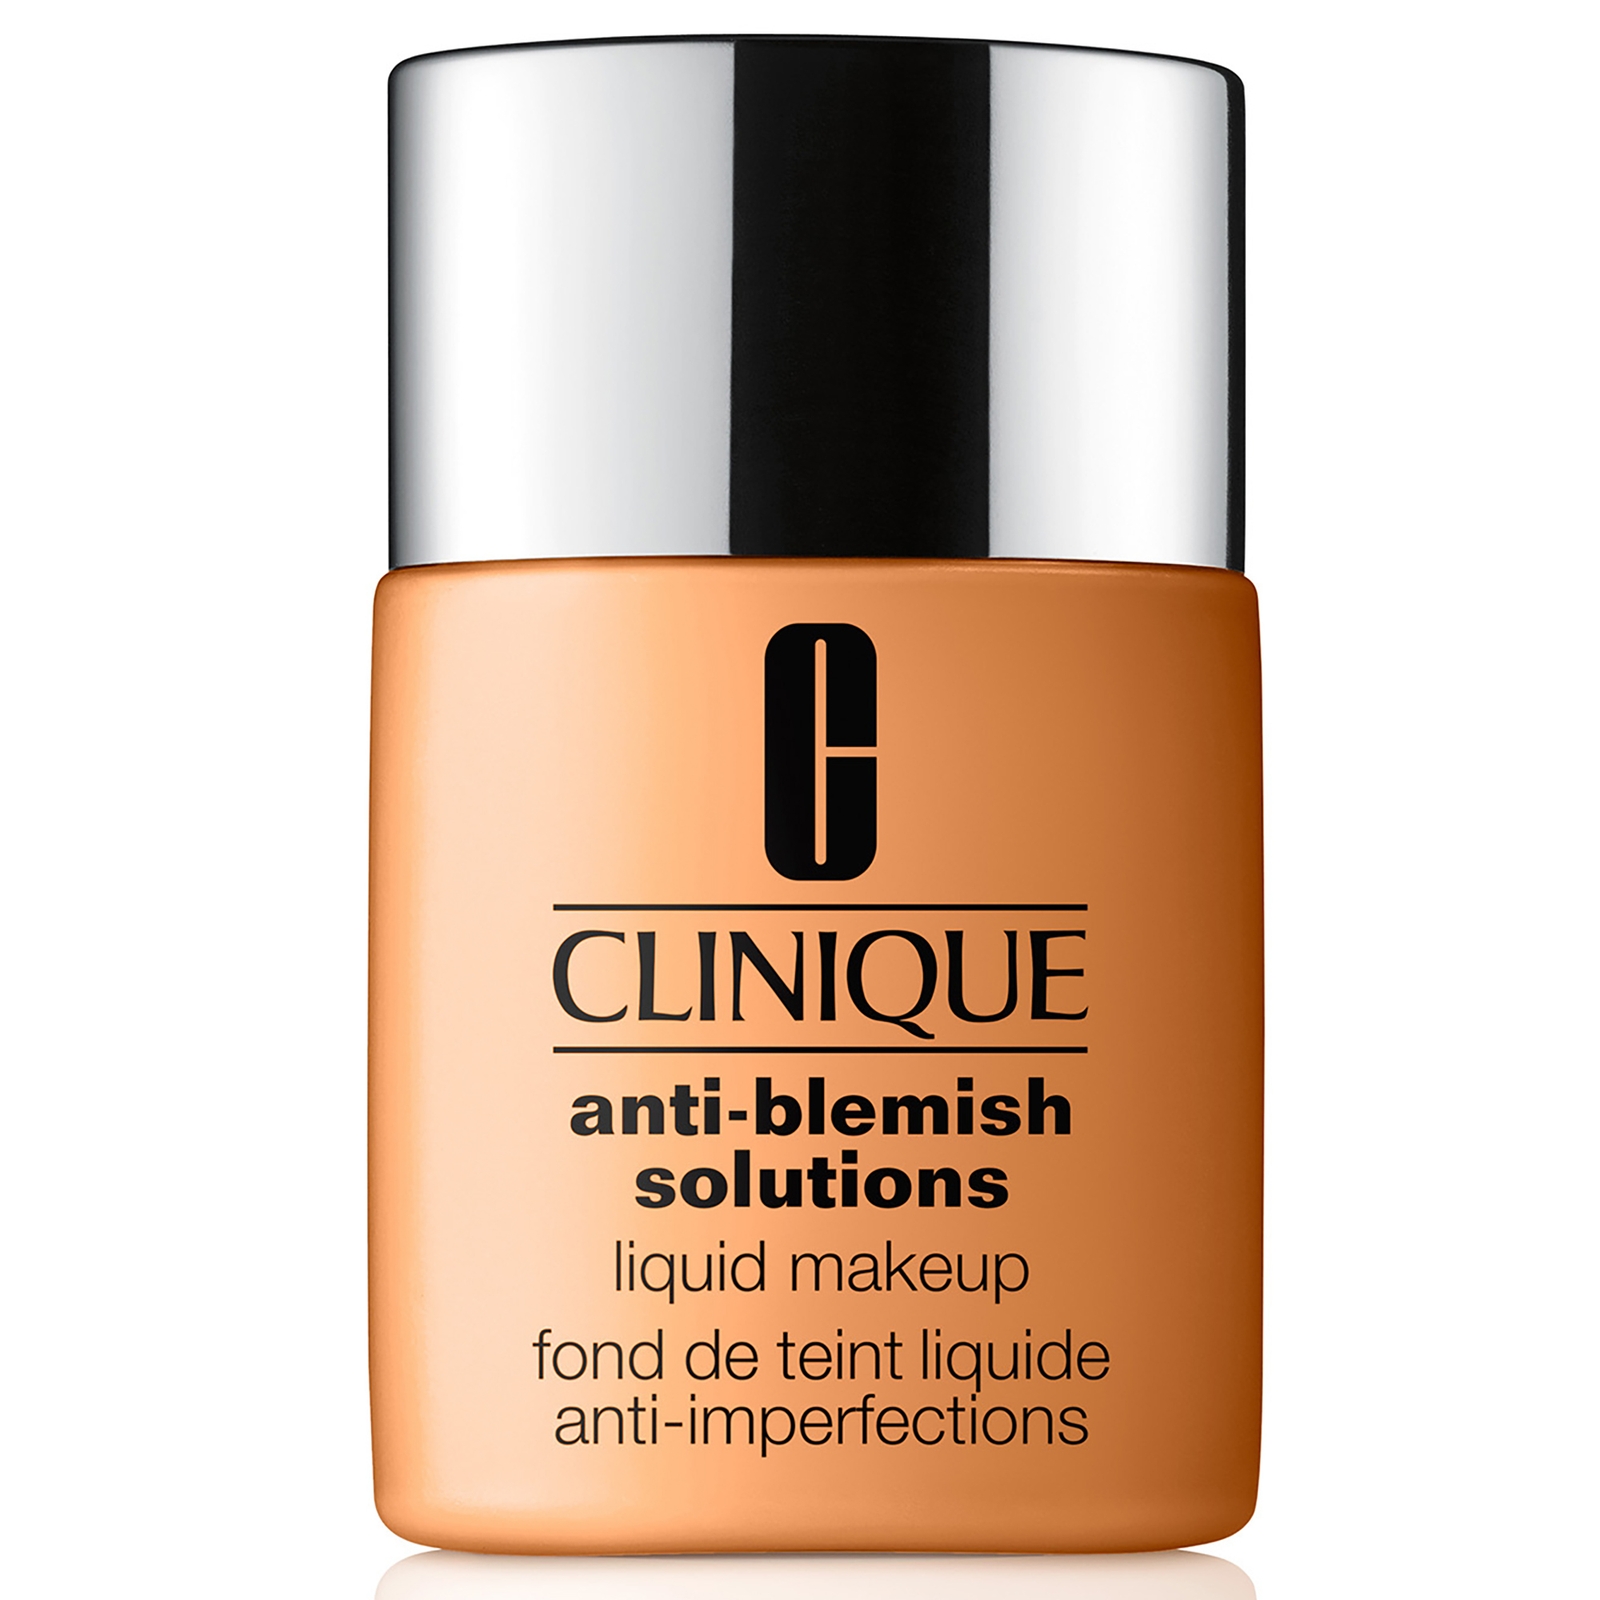 Clinique Anti-Blemish Solutions Liquid Makeup with Salicylic Acid 30ml (Various Shades) - WN 56 Cashew